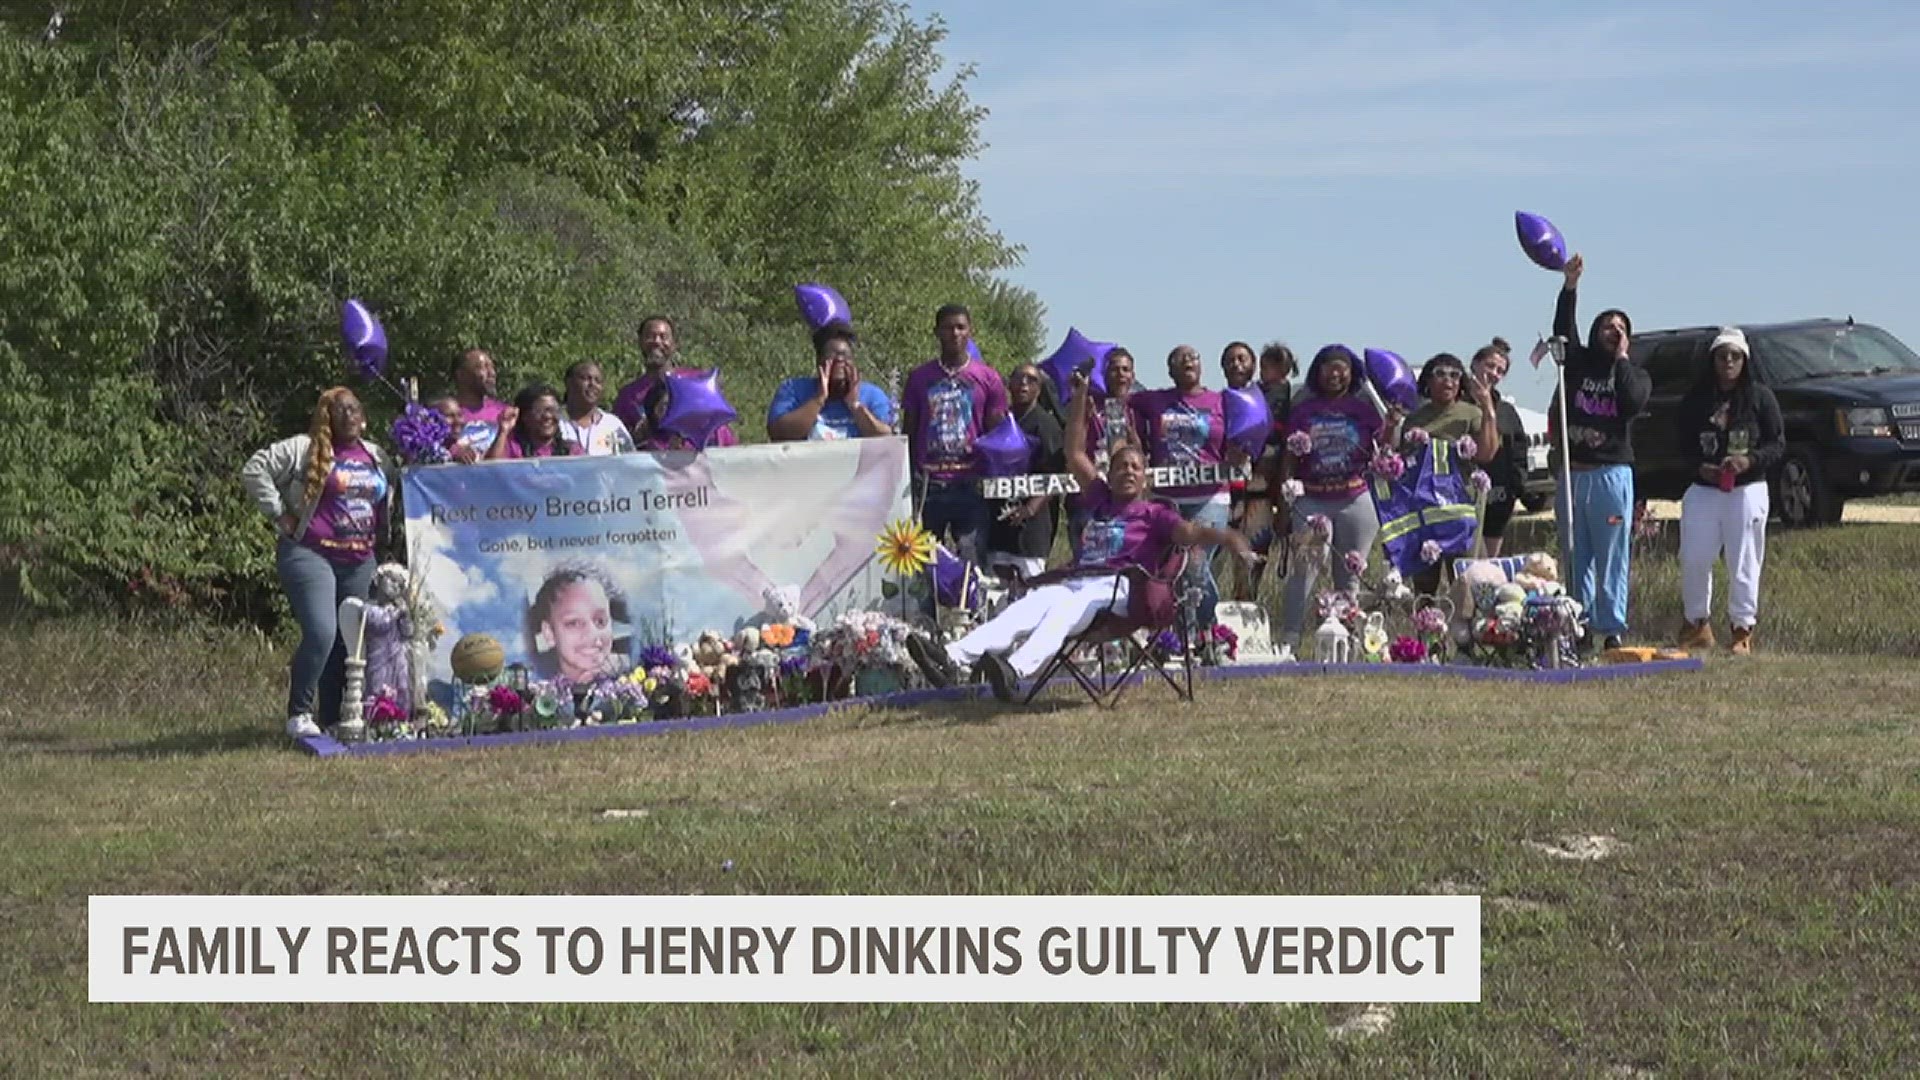 News 8's Joe McCoy spoke with the family after the verdict was announced this morning. They had gathered near the memorial for 10-year-old Breasia.